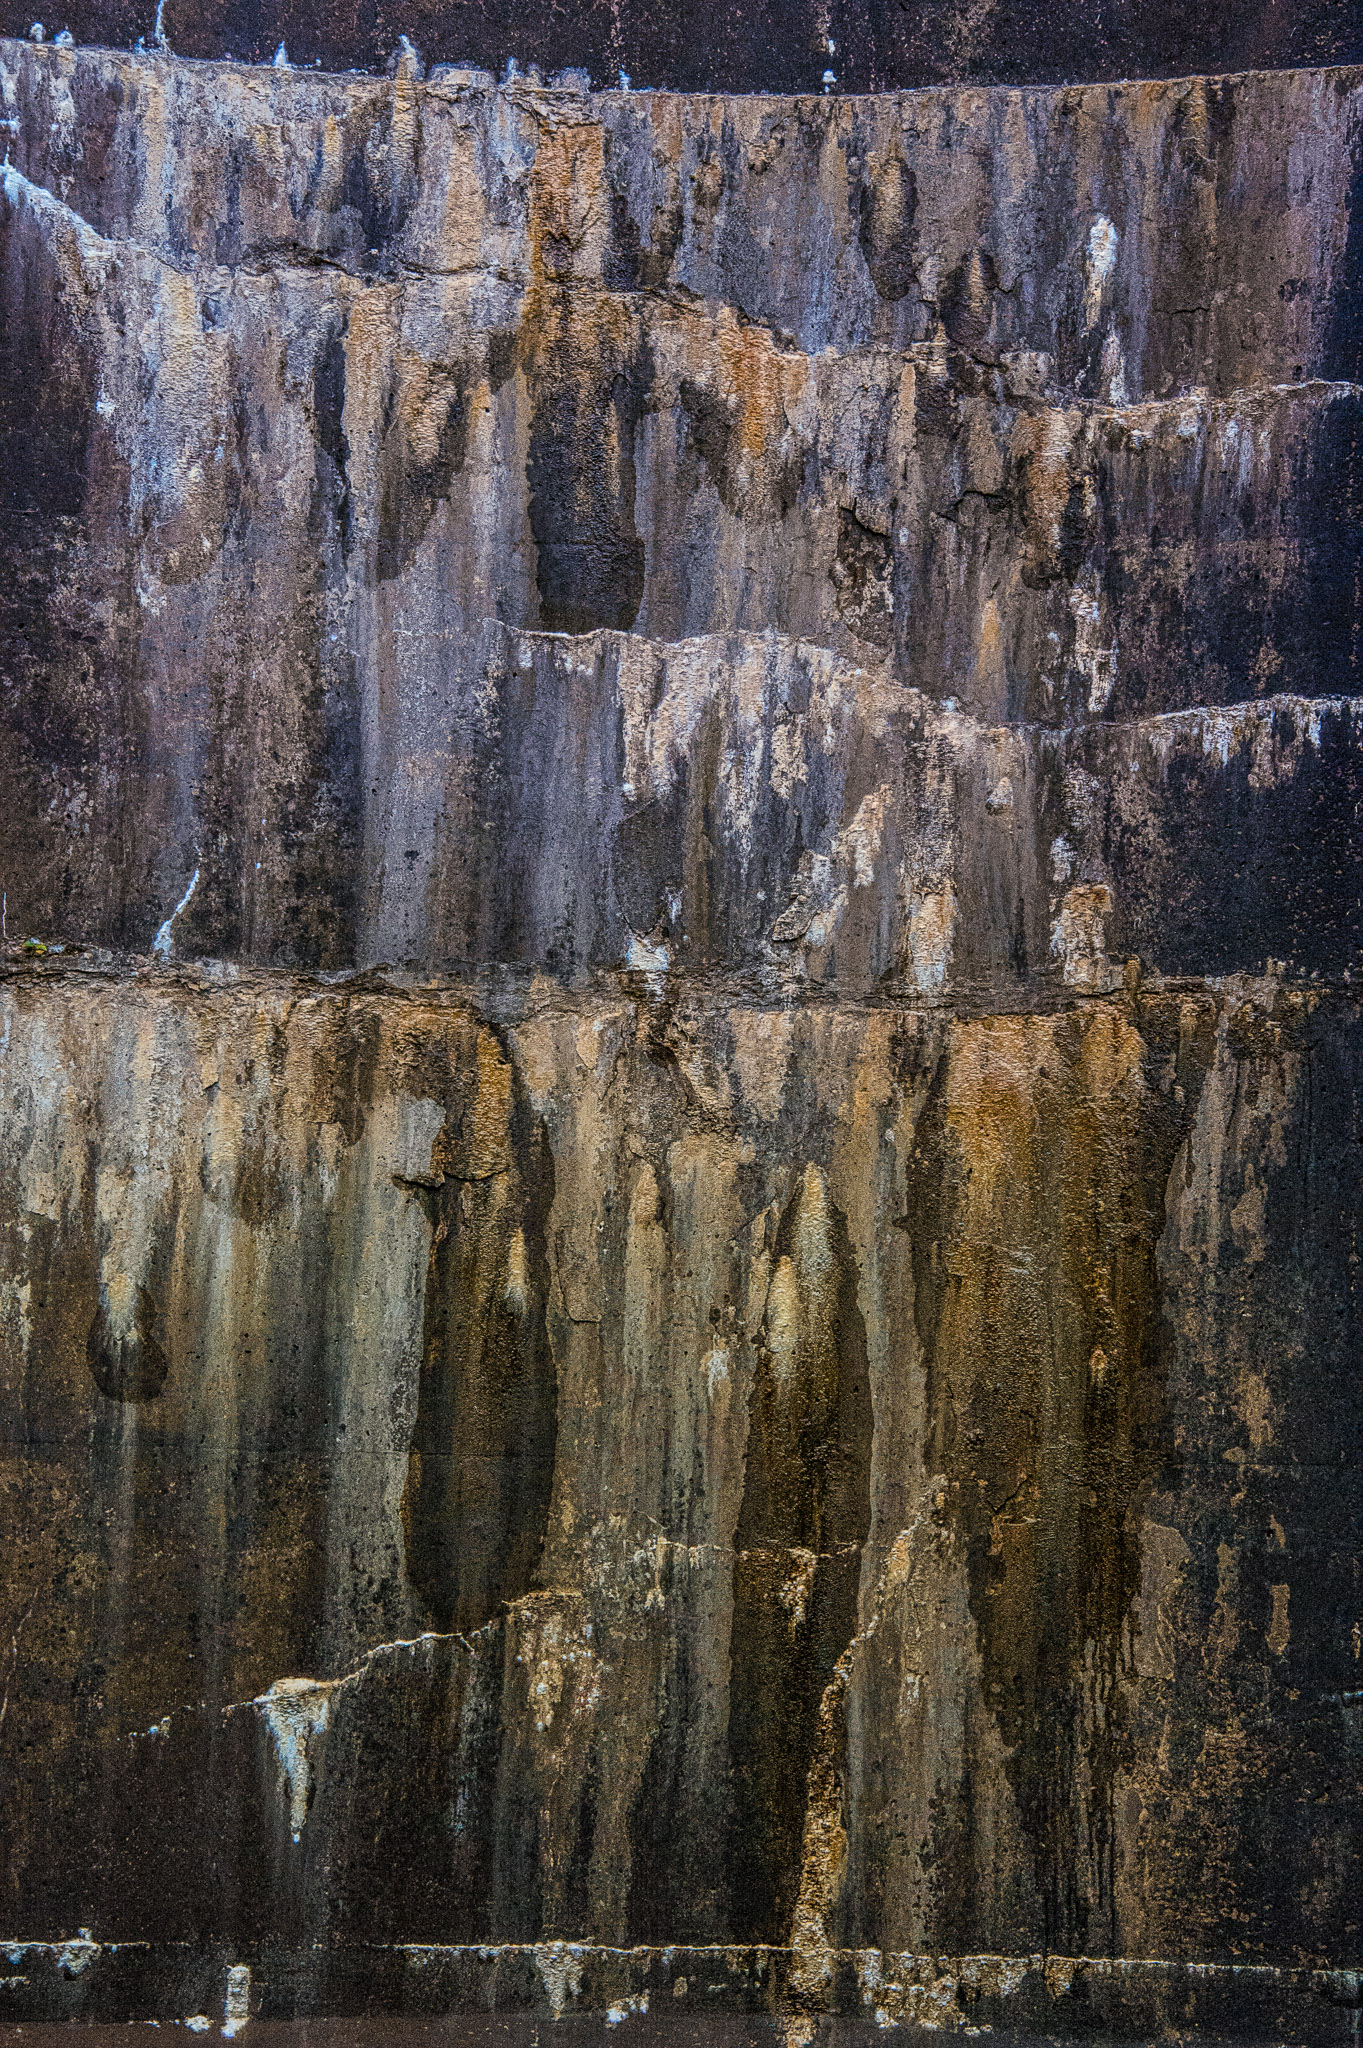 Water stains create abstract patterns on the dam spillway at Sylvan Lake in Custer State Park, South Dakota.